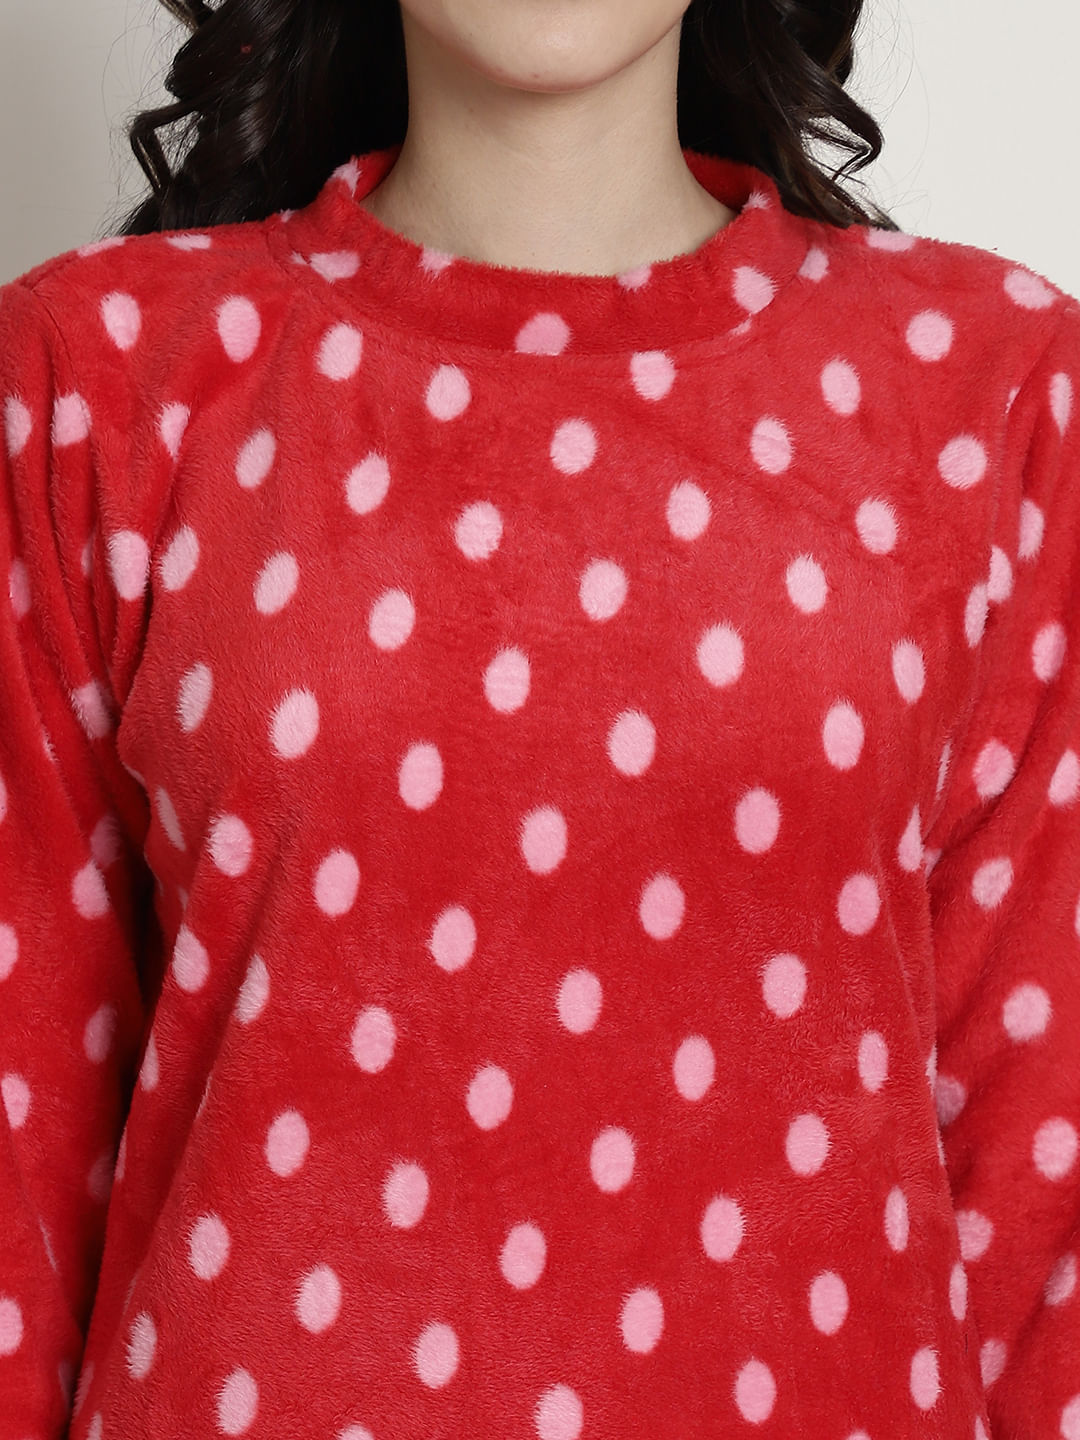 Red Polka Dots Winter Night Suit